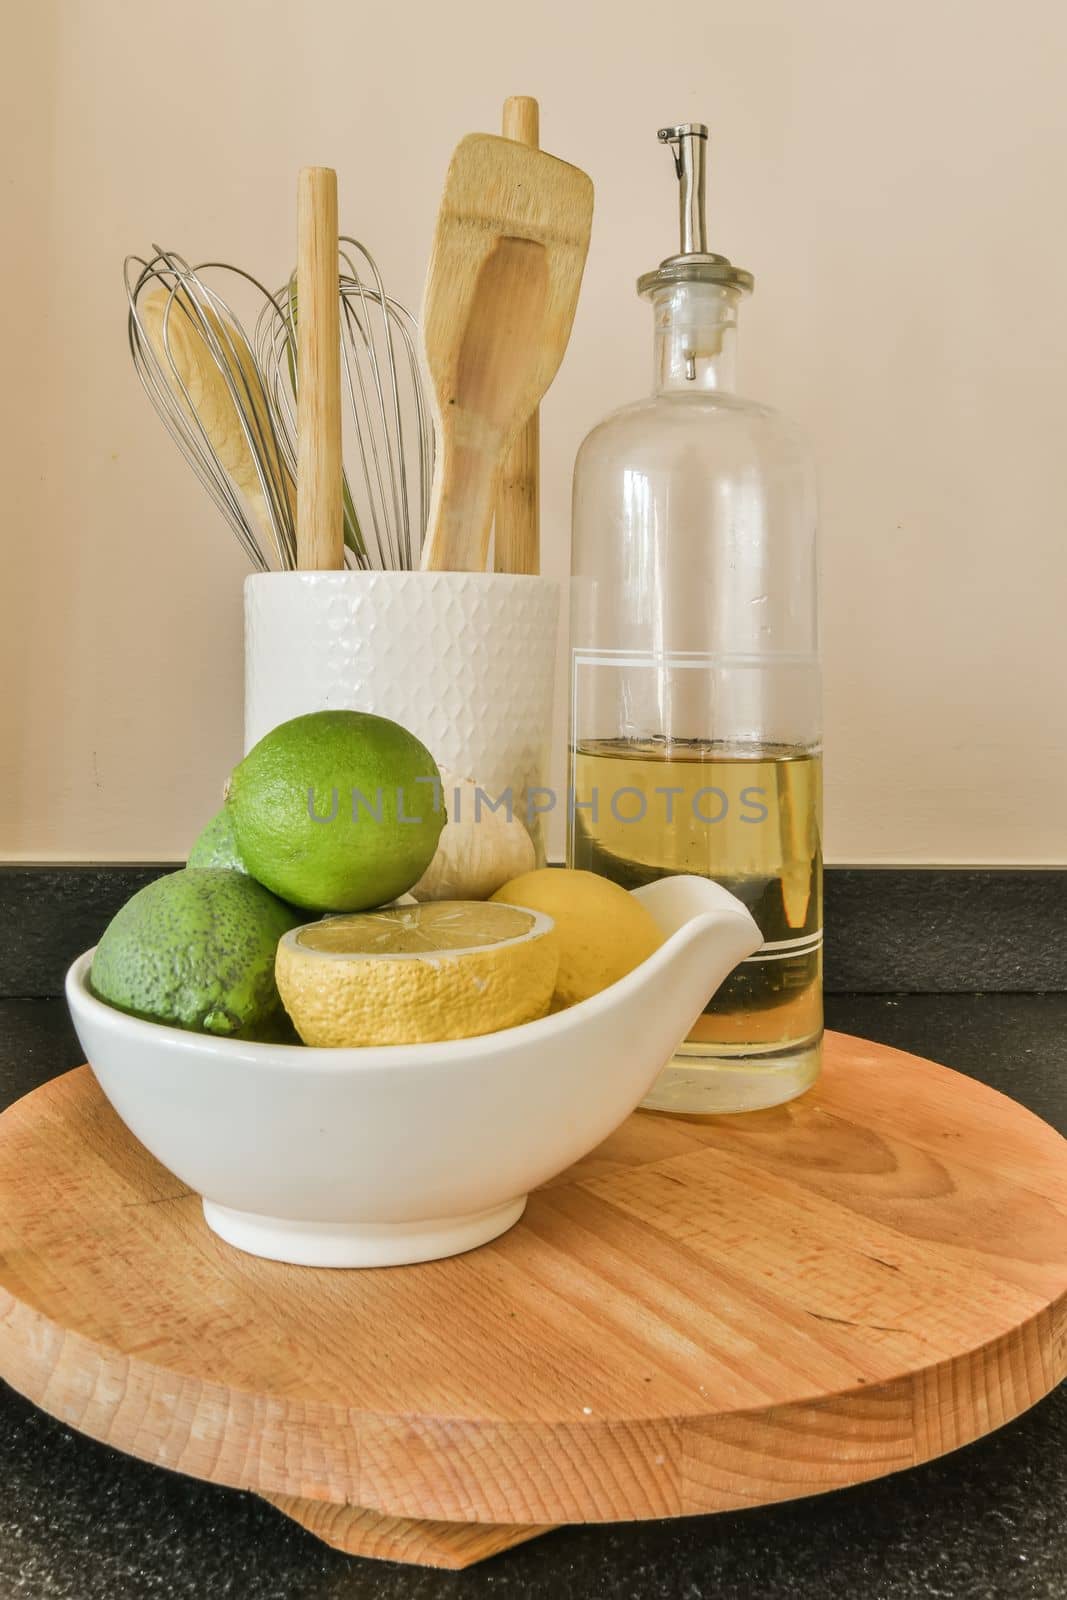 some lemons and limes in a bowl on a wooden cutting board next to a bottle of olive oil